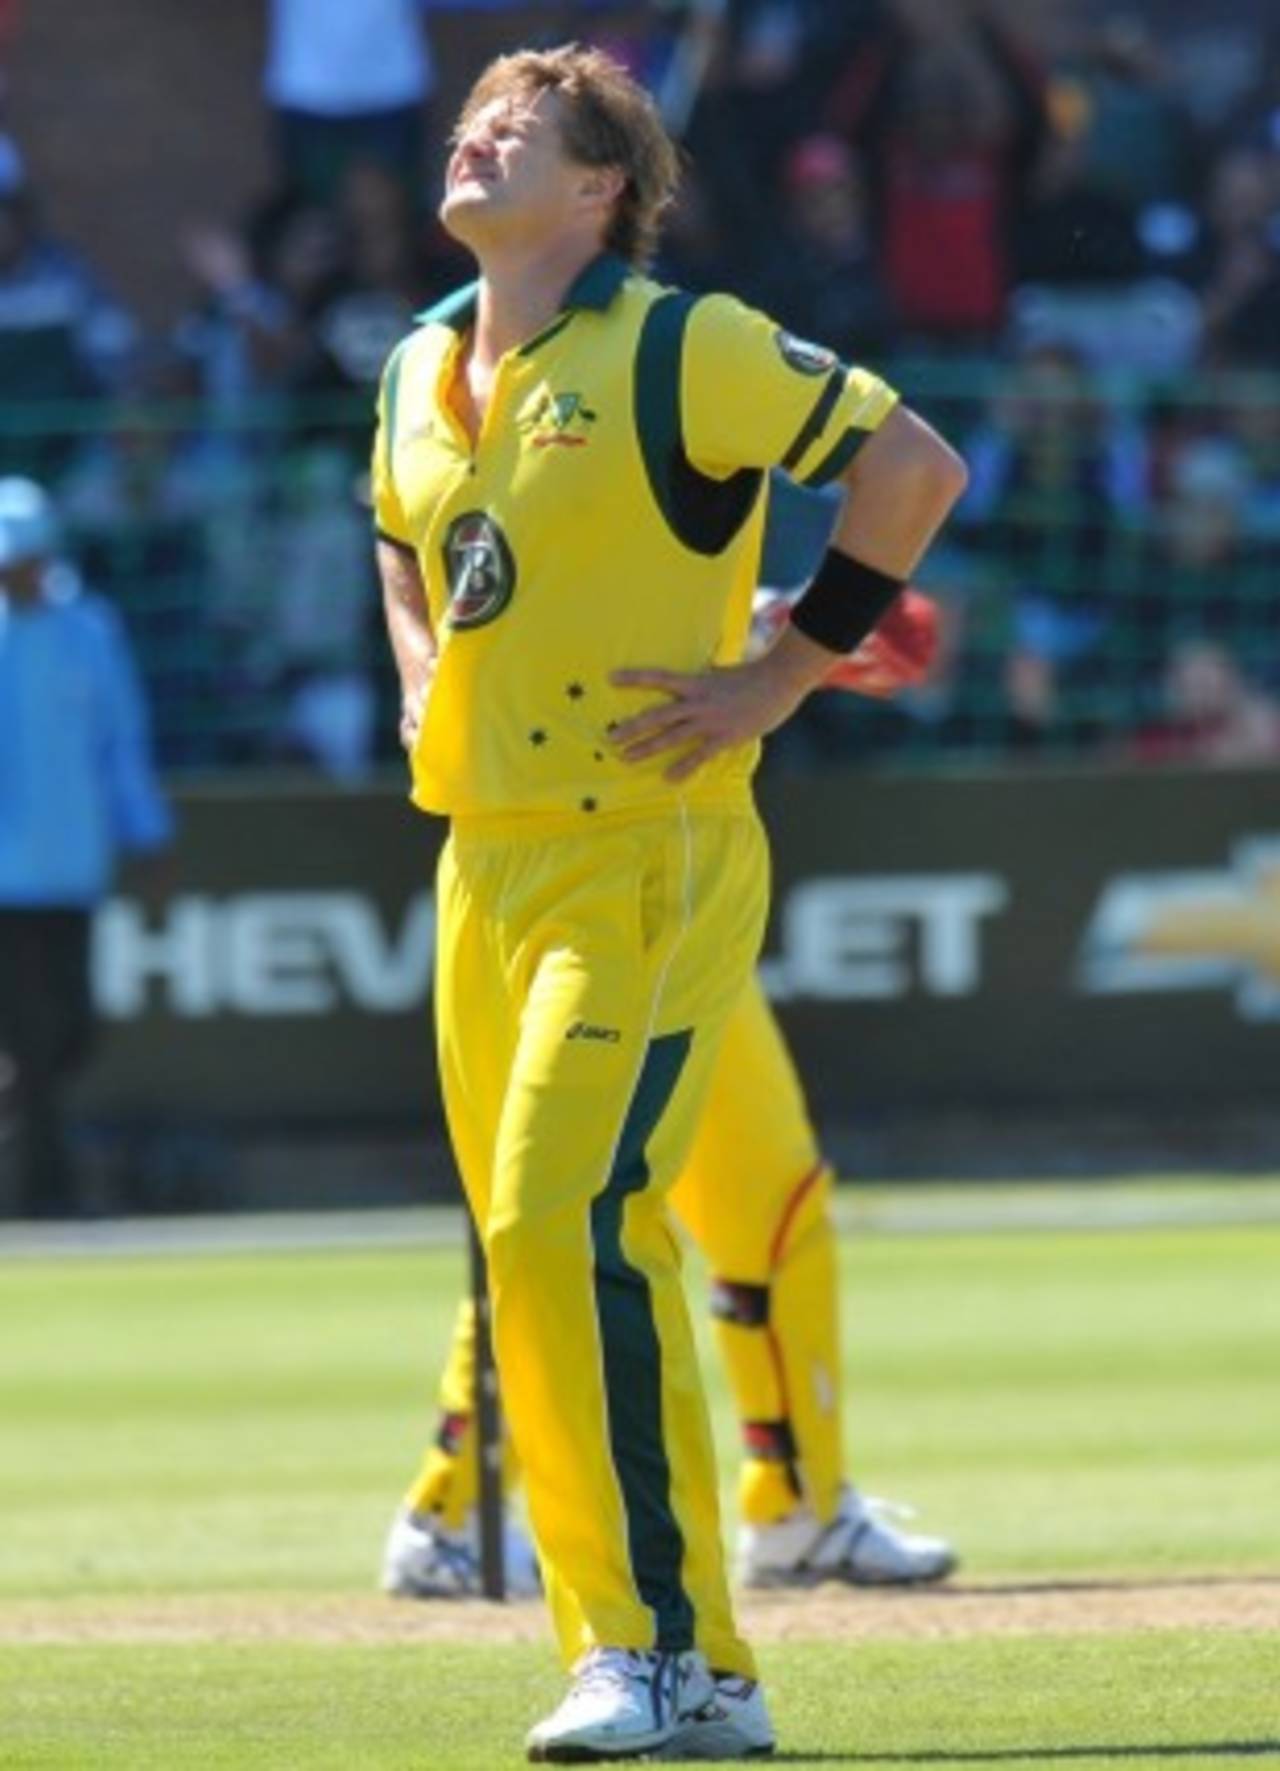 Shane Watson suffered back spasms and went off the field, South Africa v Australia, 2nd ODI, Port Elizabeth, October 23, 2011